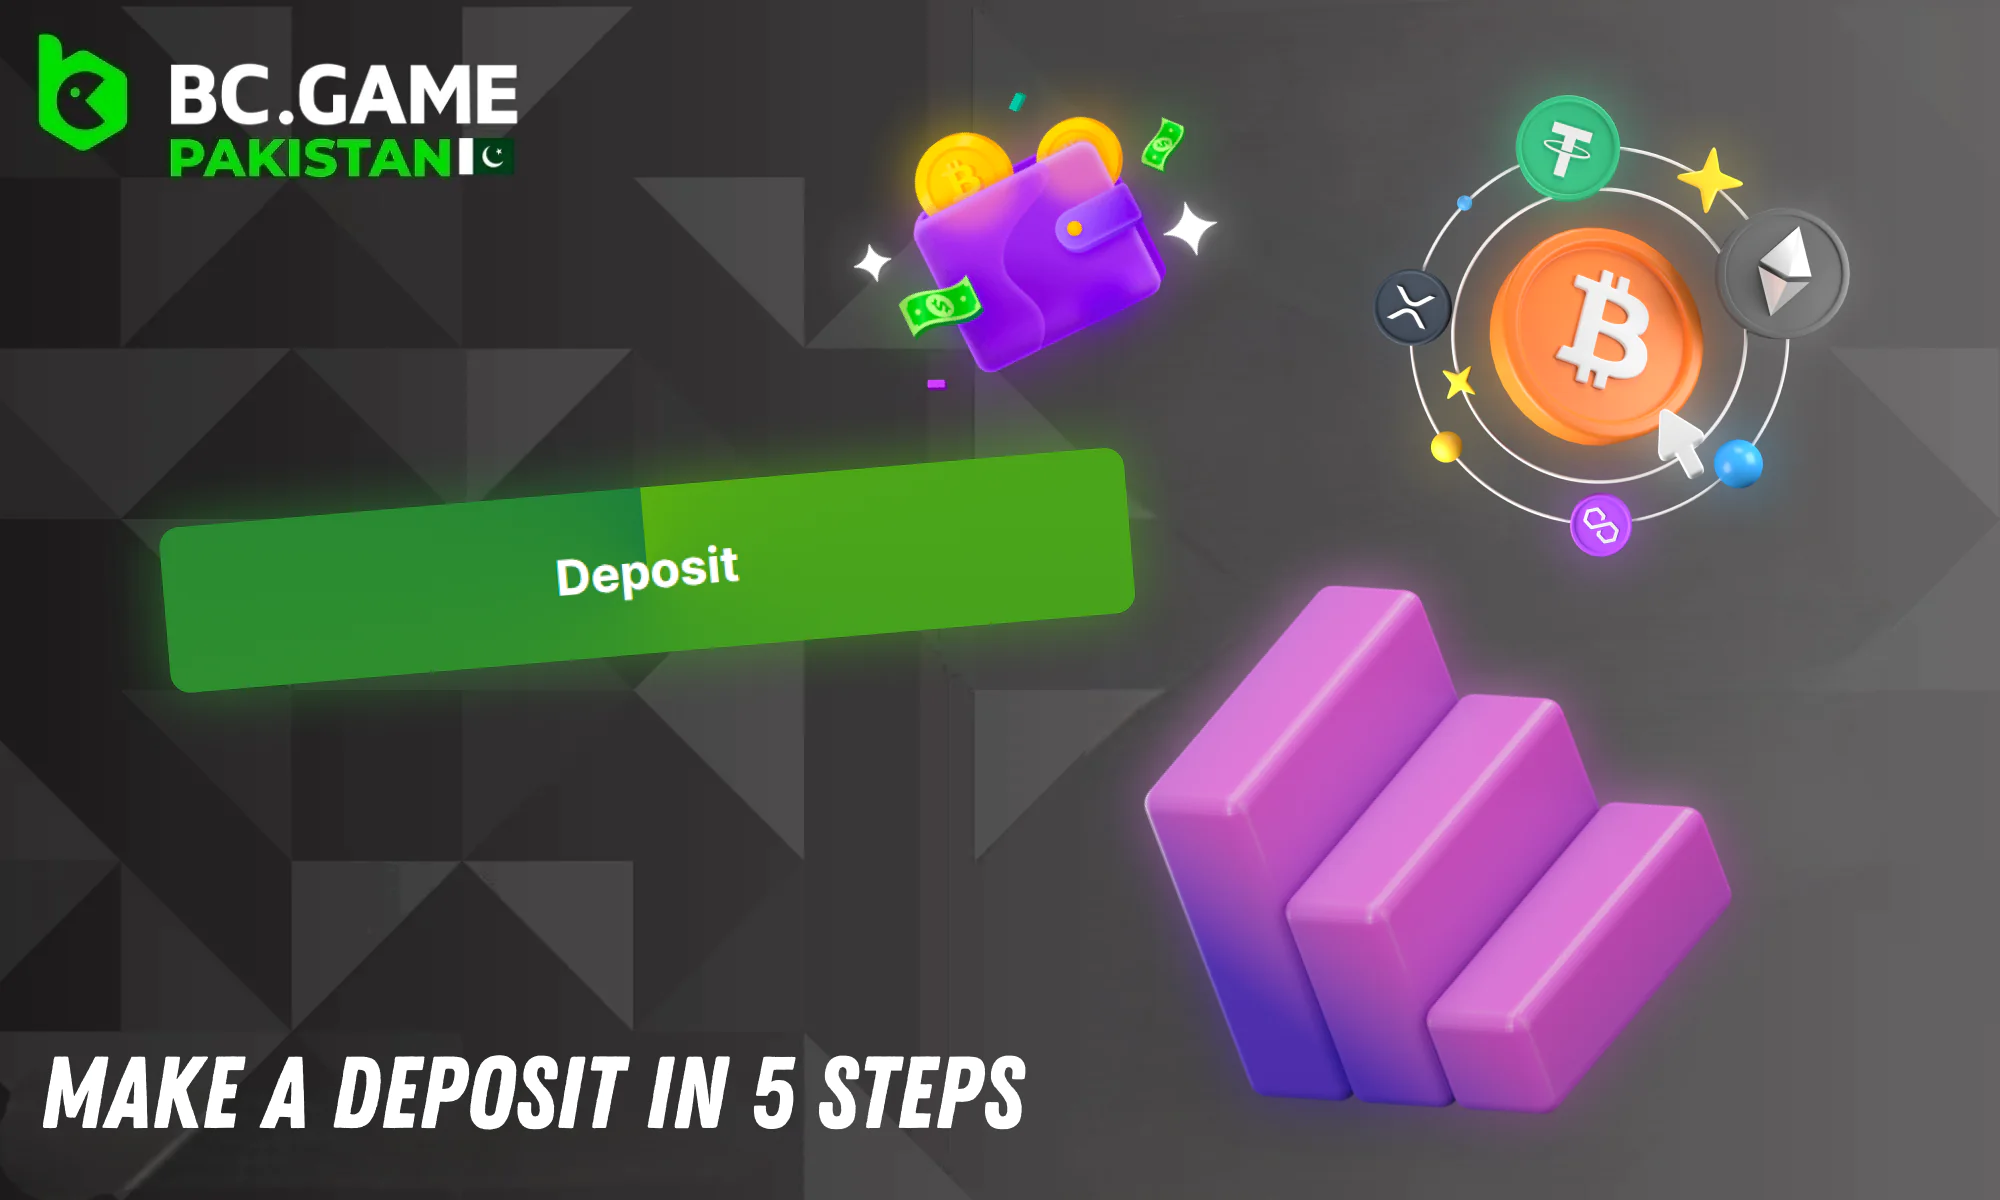 Follow these steps to effortlessly deposit